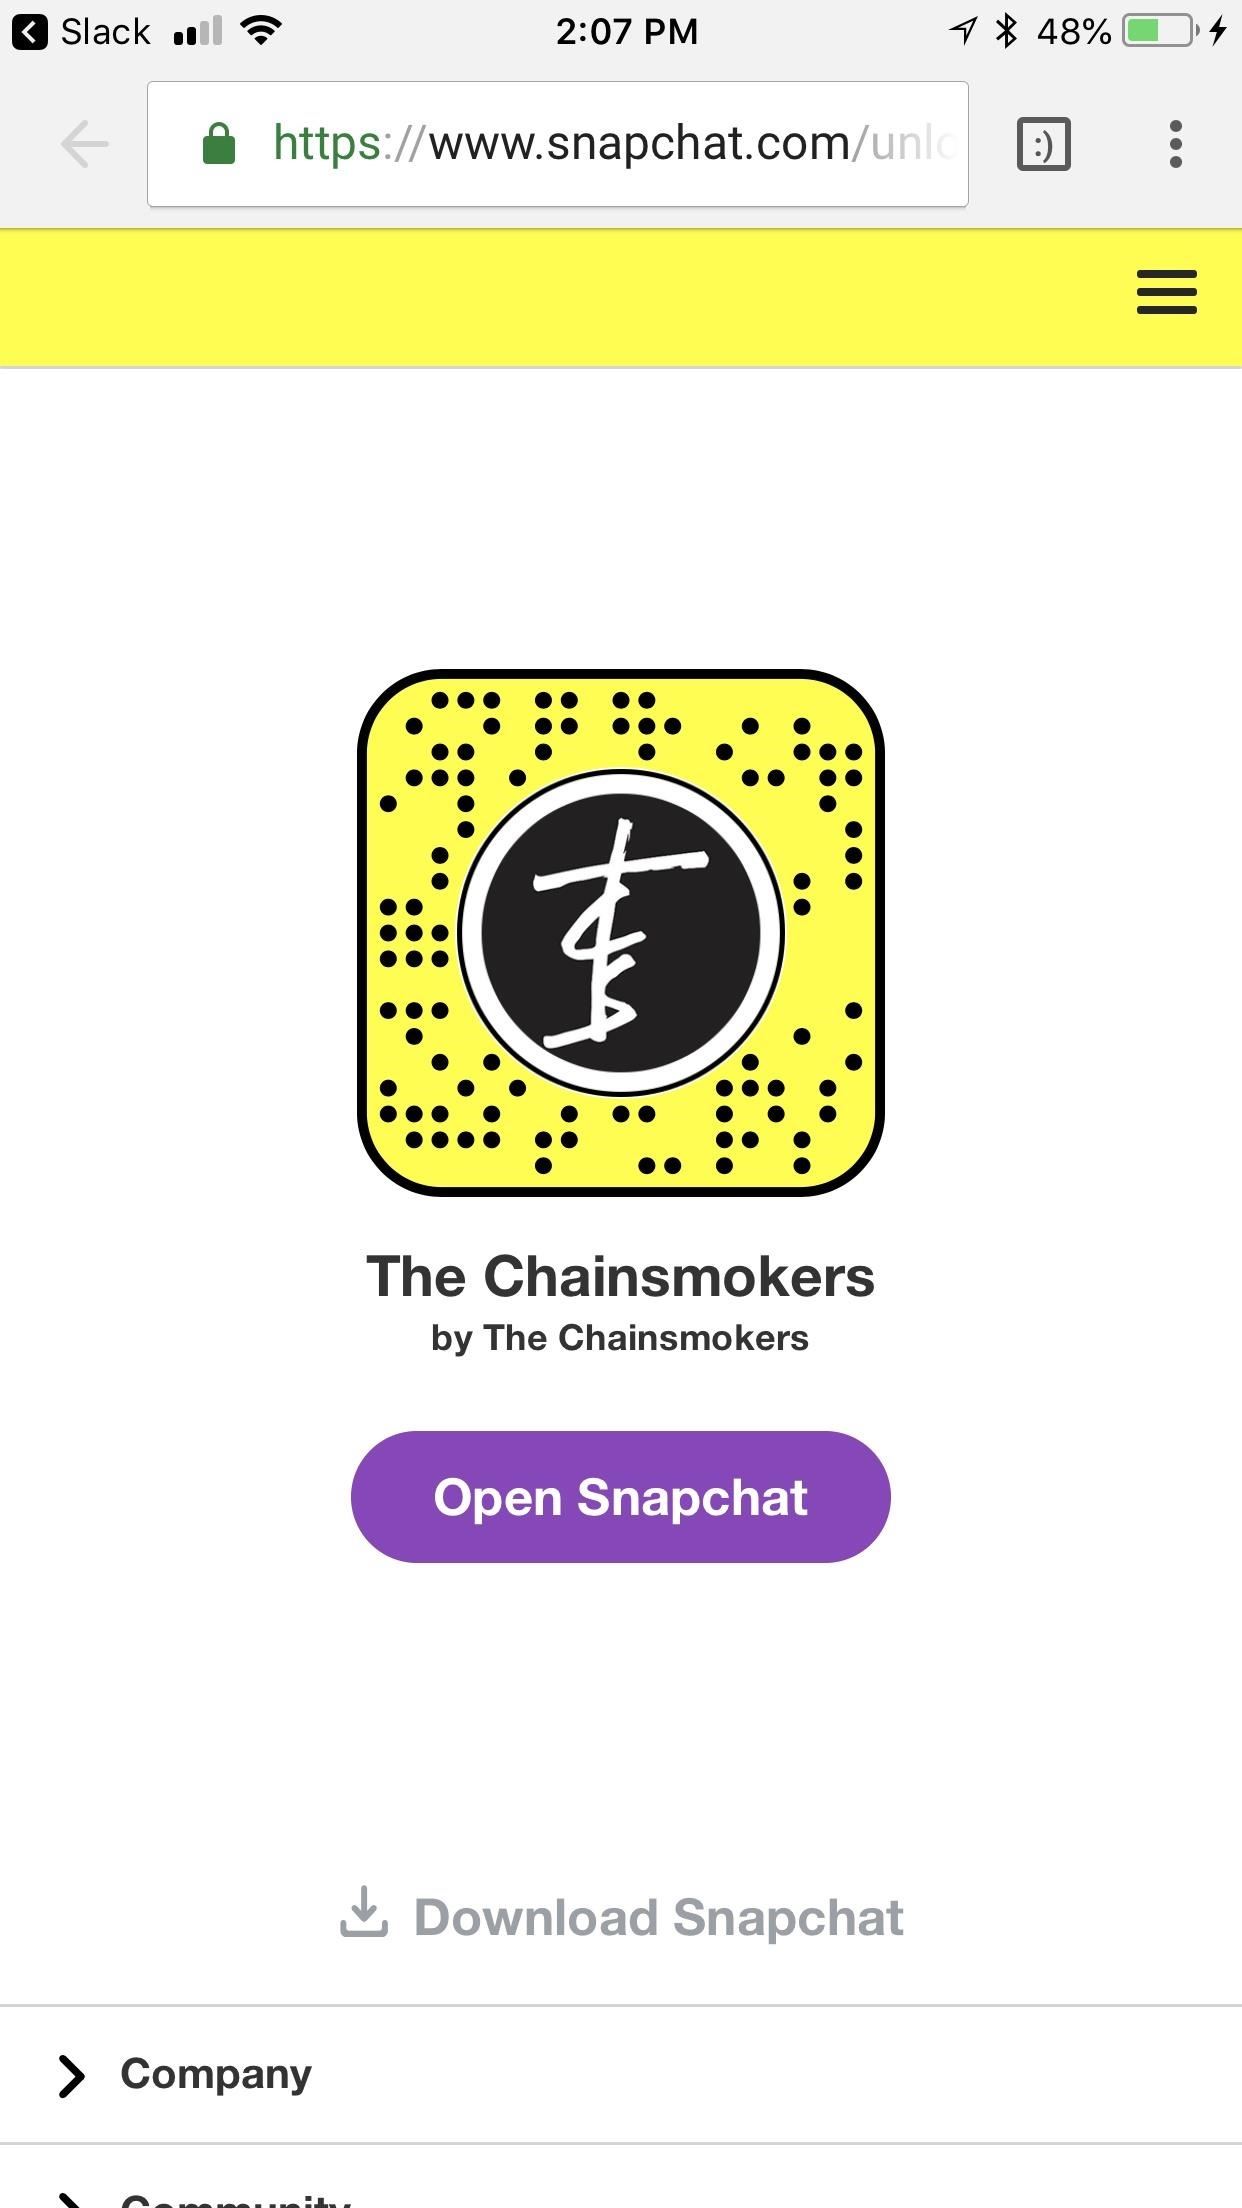 5 Secret Snapchat Lenses That Will Make Your Weekend — Infinity War, the Chainsmokers & More